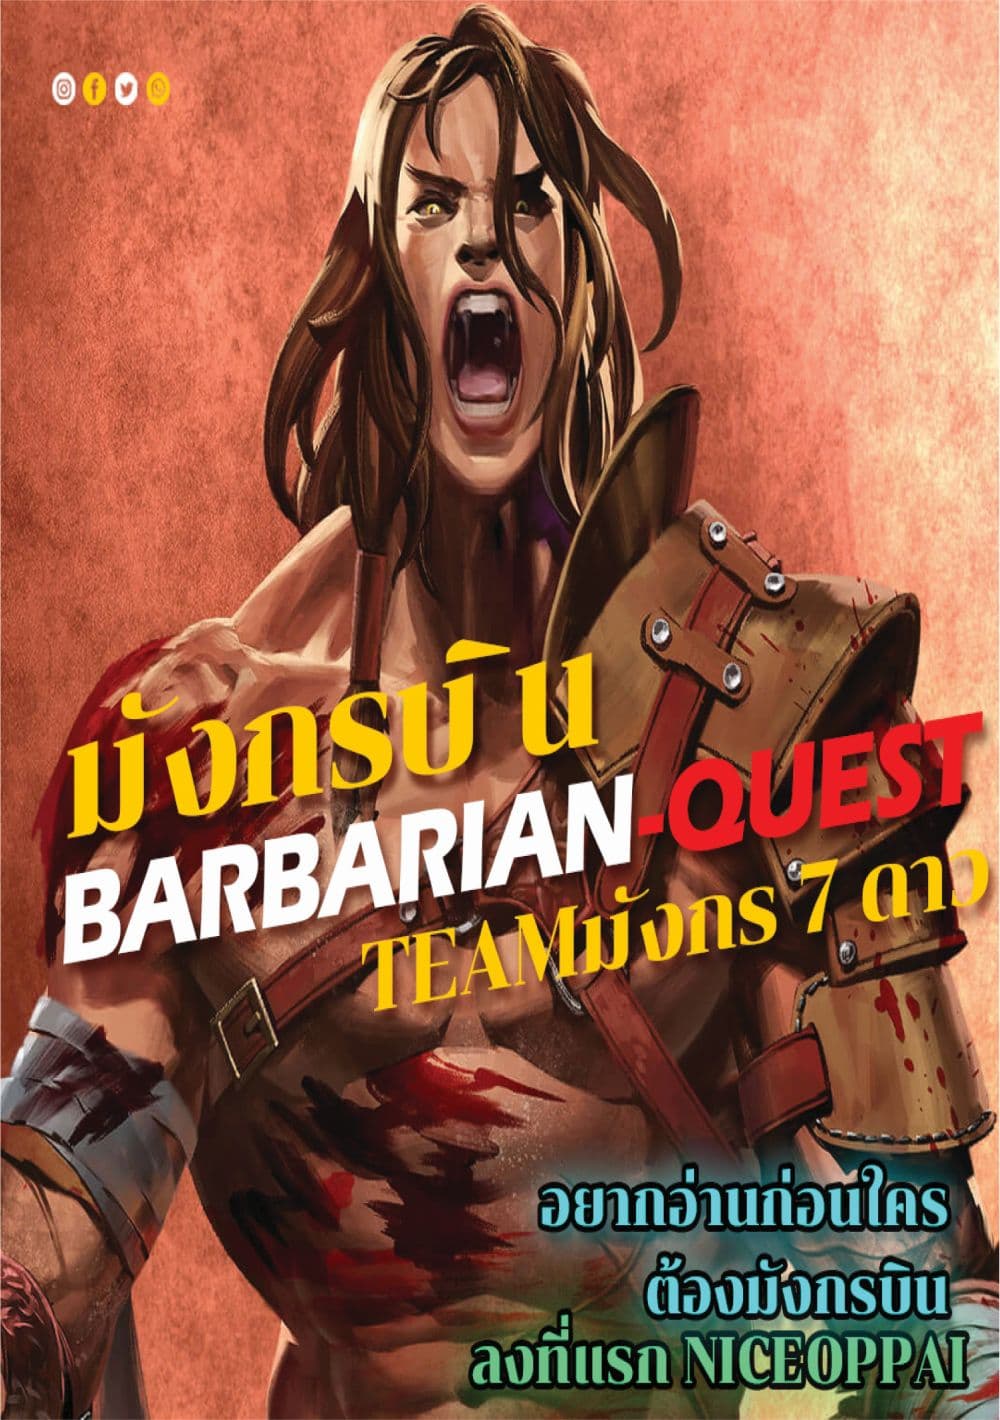 Barbarian Quest 7 01